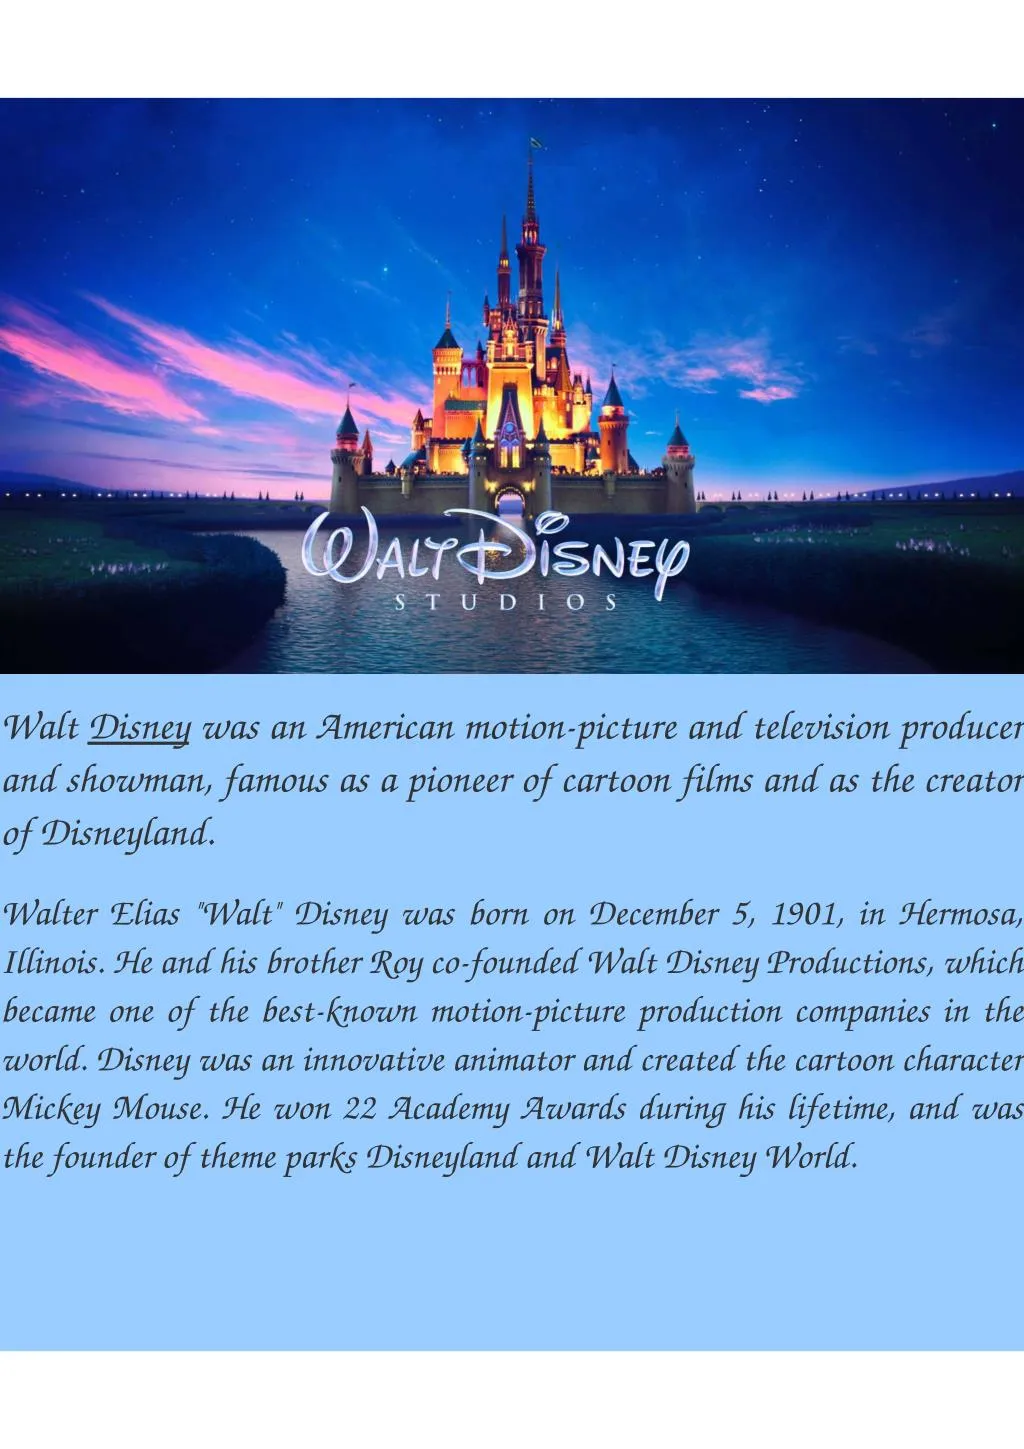 walt disney was an american motion picture